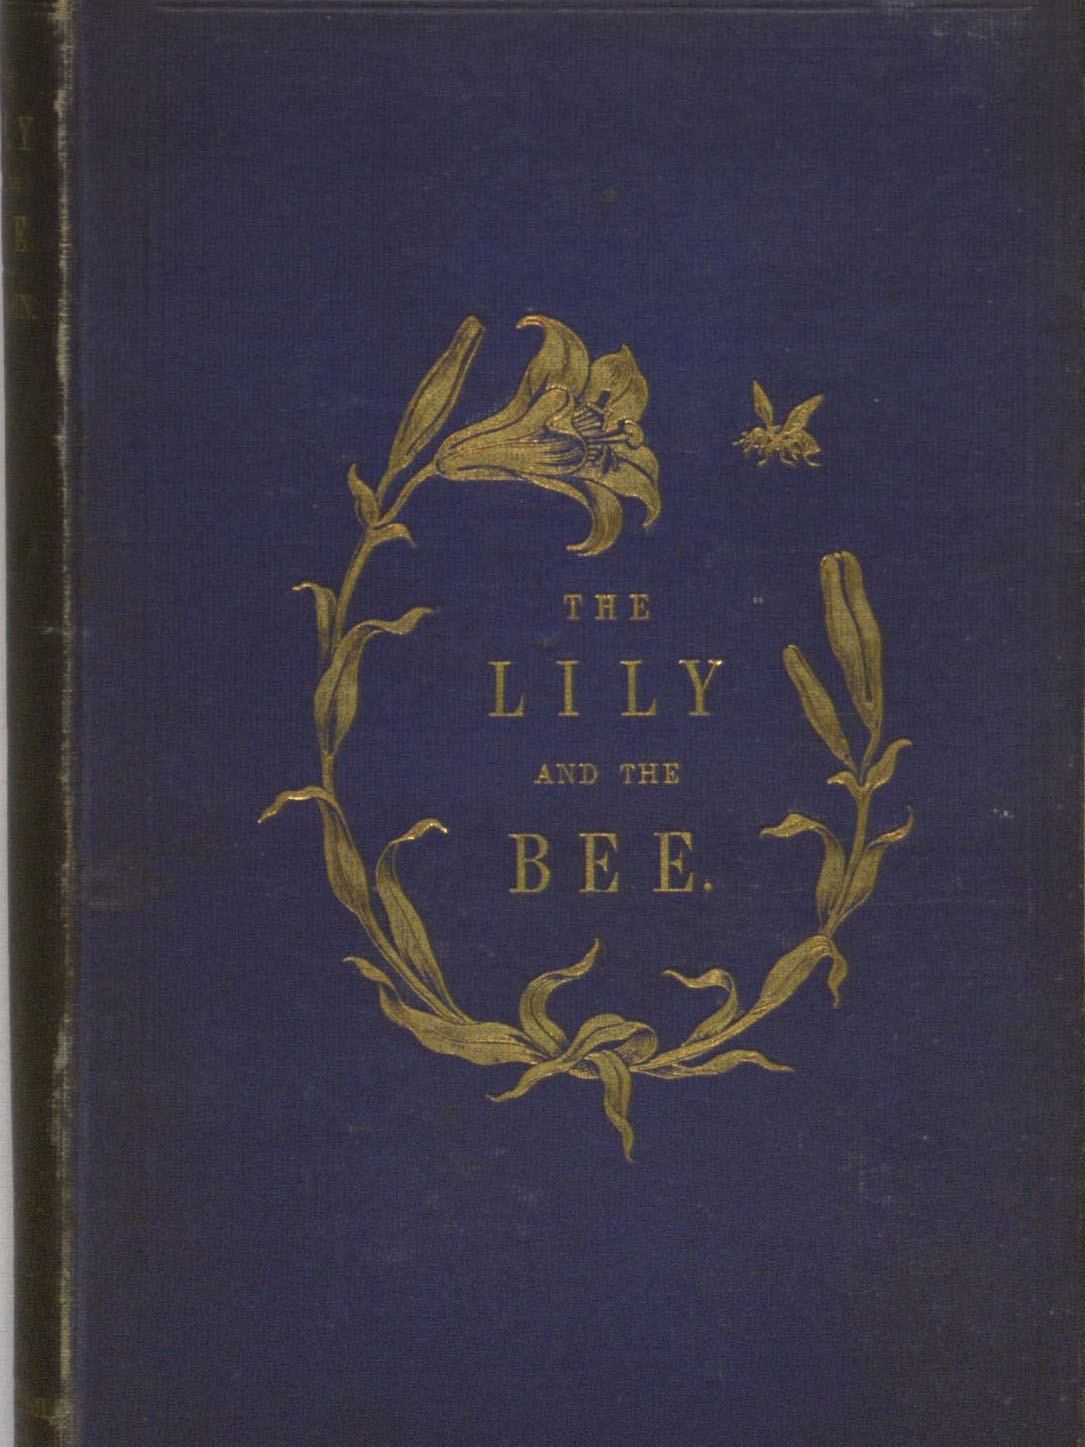 Cover of "Lily and the Bee," a blue cover with gold lettering that reads: "Lily and the Bee" with illustration of a lily curling around the words and bee on the upper right side